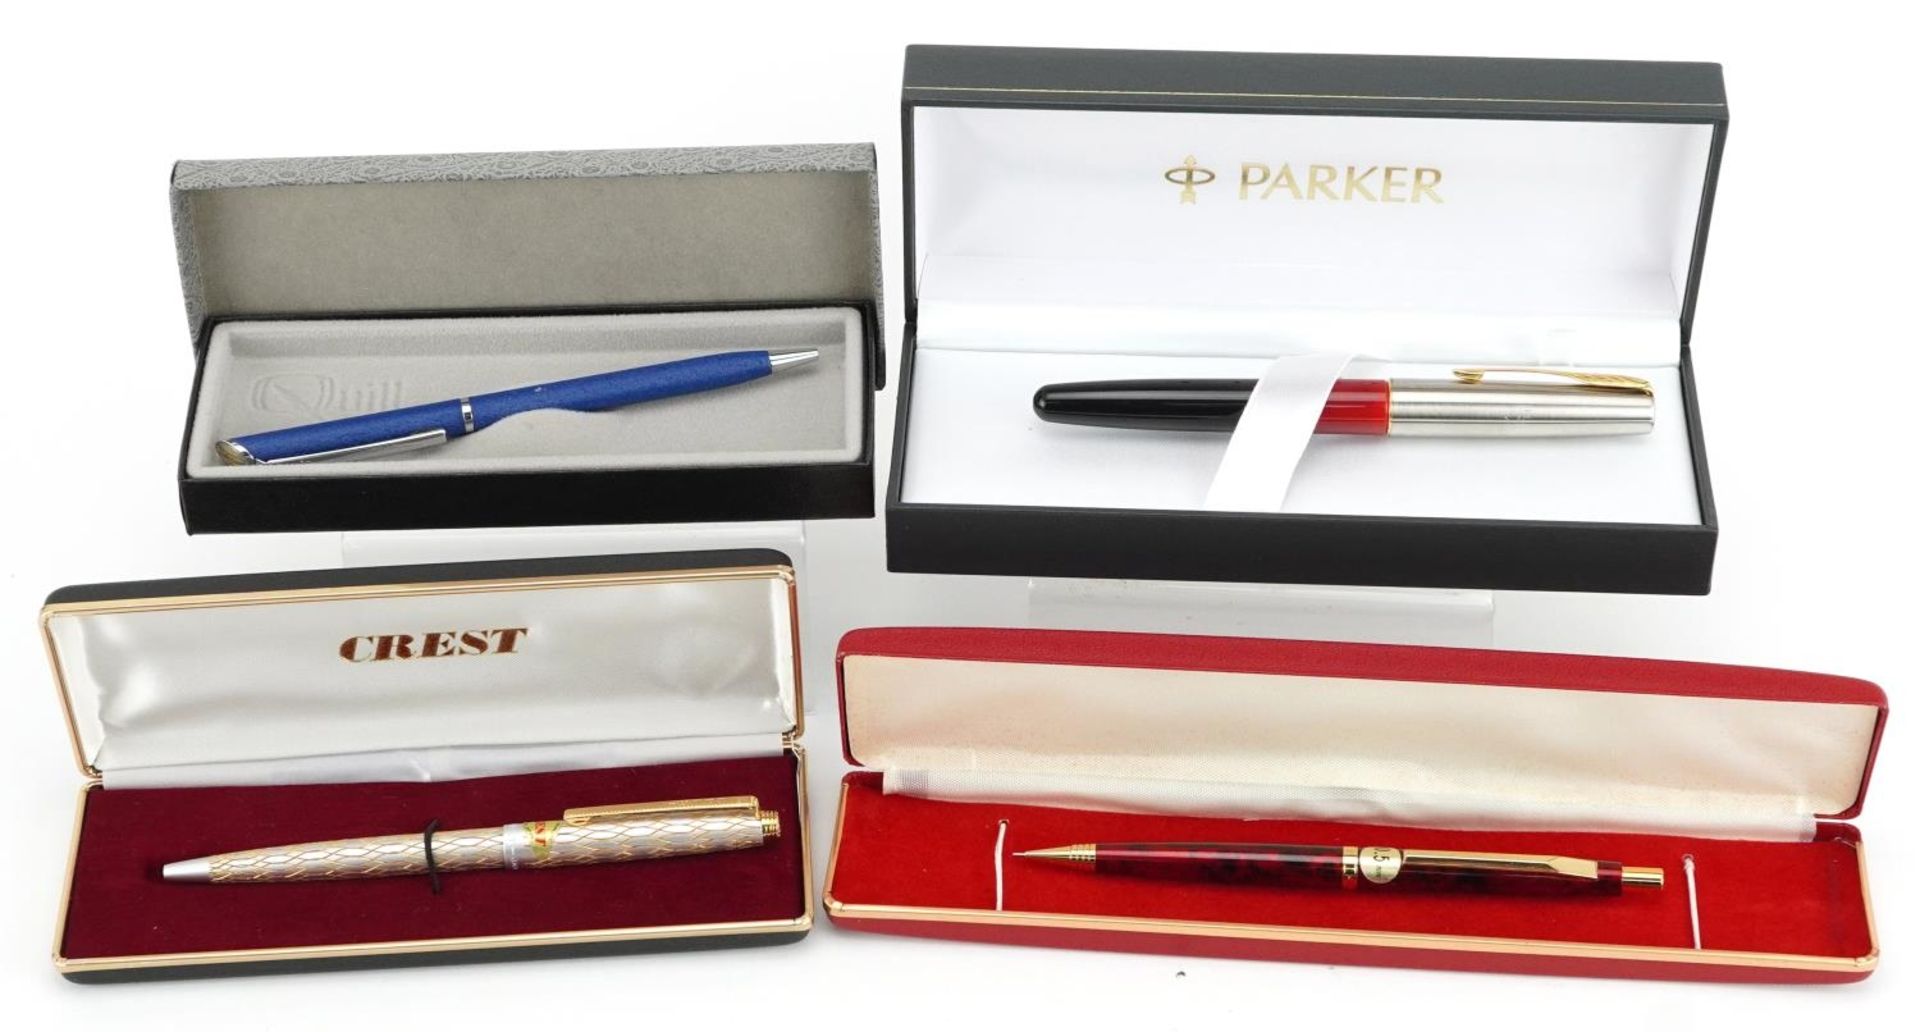 Four pens and pencils with boxes including a Parker Frontier : For further information on this lot